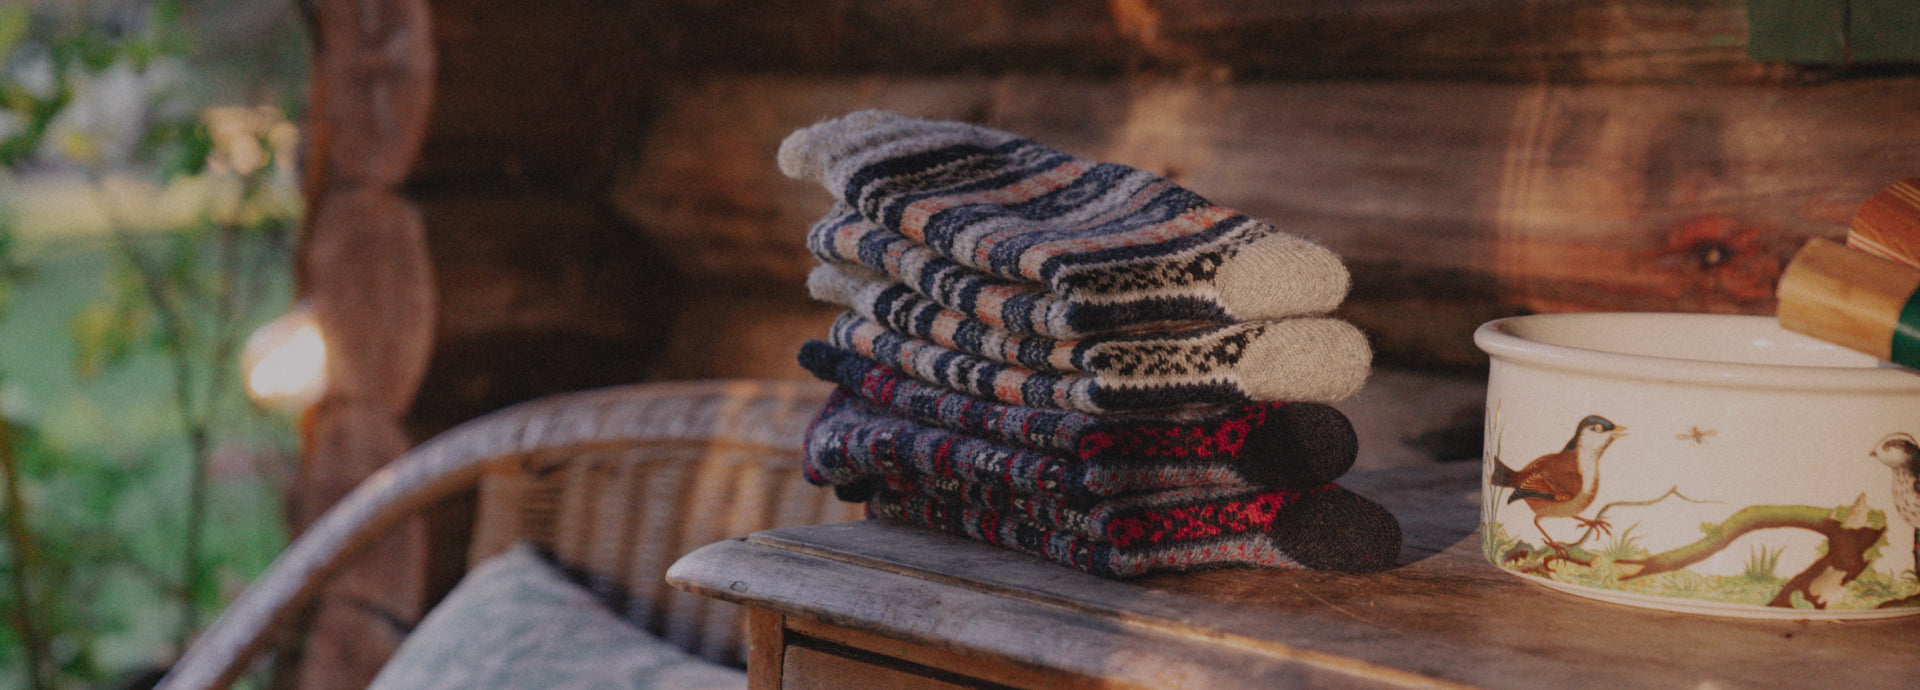 Storing Your Wool Socks for the Next Season: Best Practices